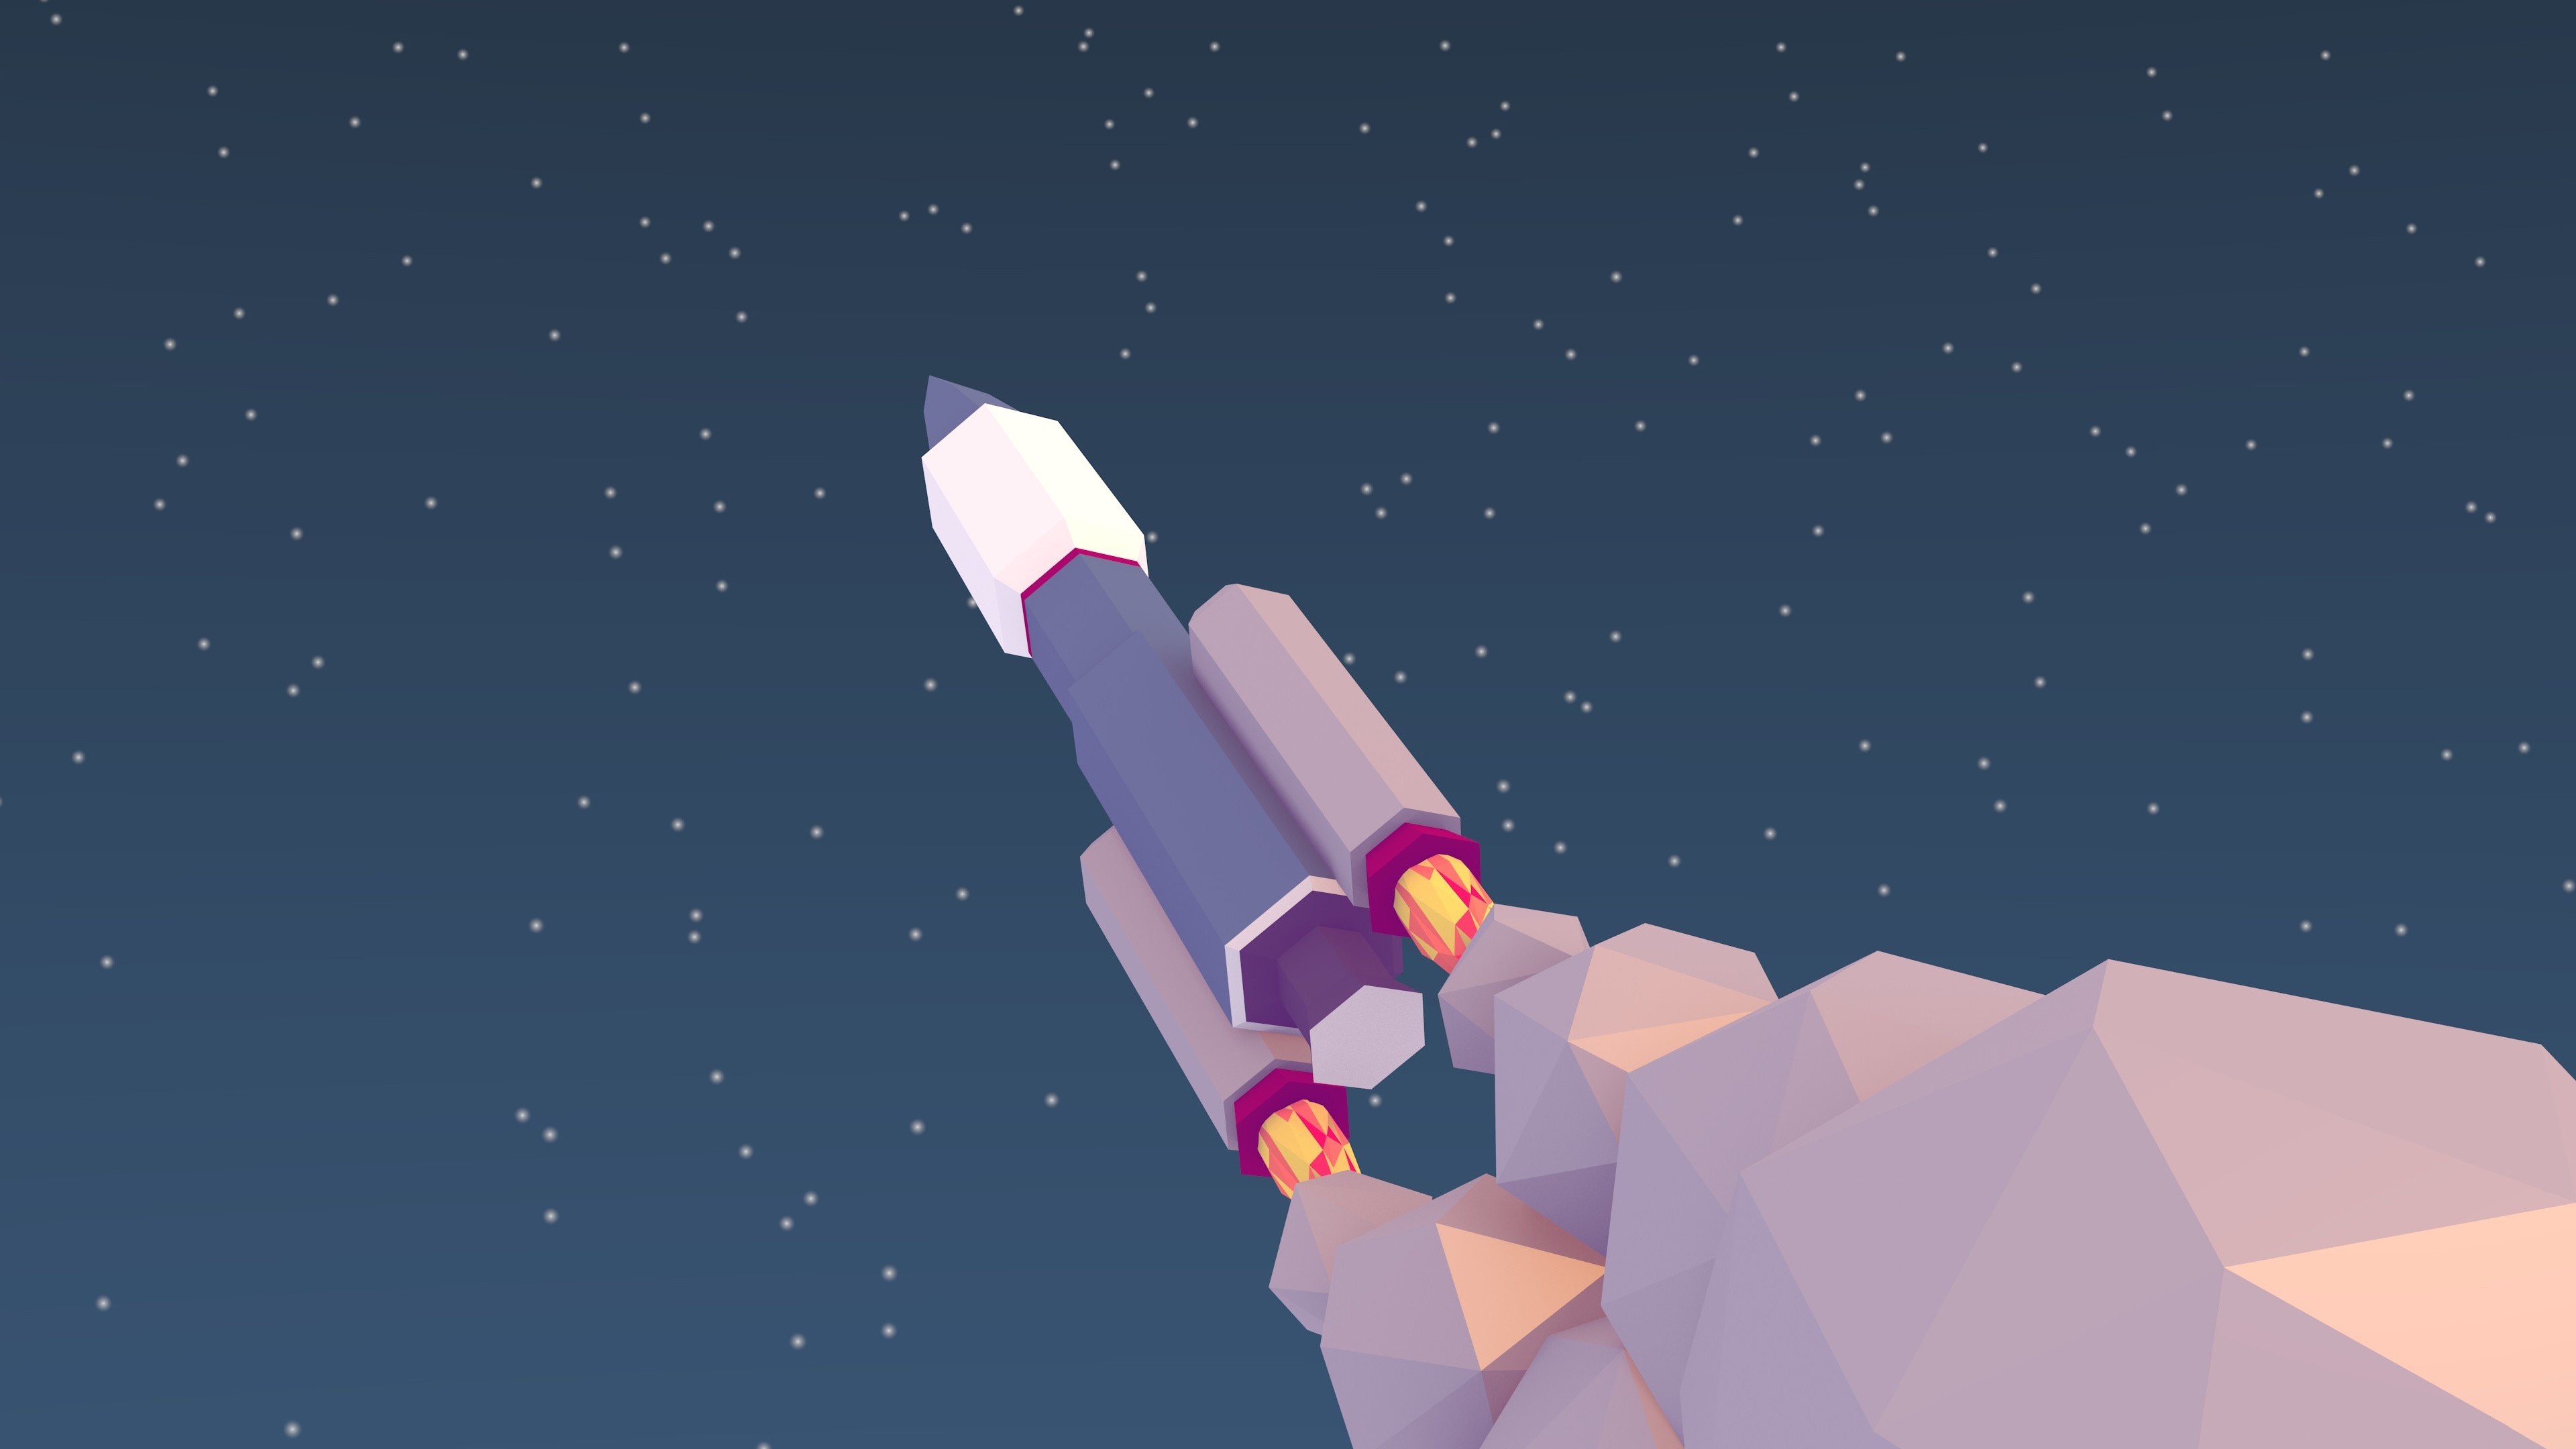 General 3840x2160 space low poly rocket vehicle sky stars